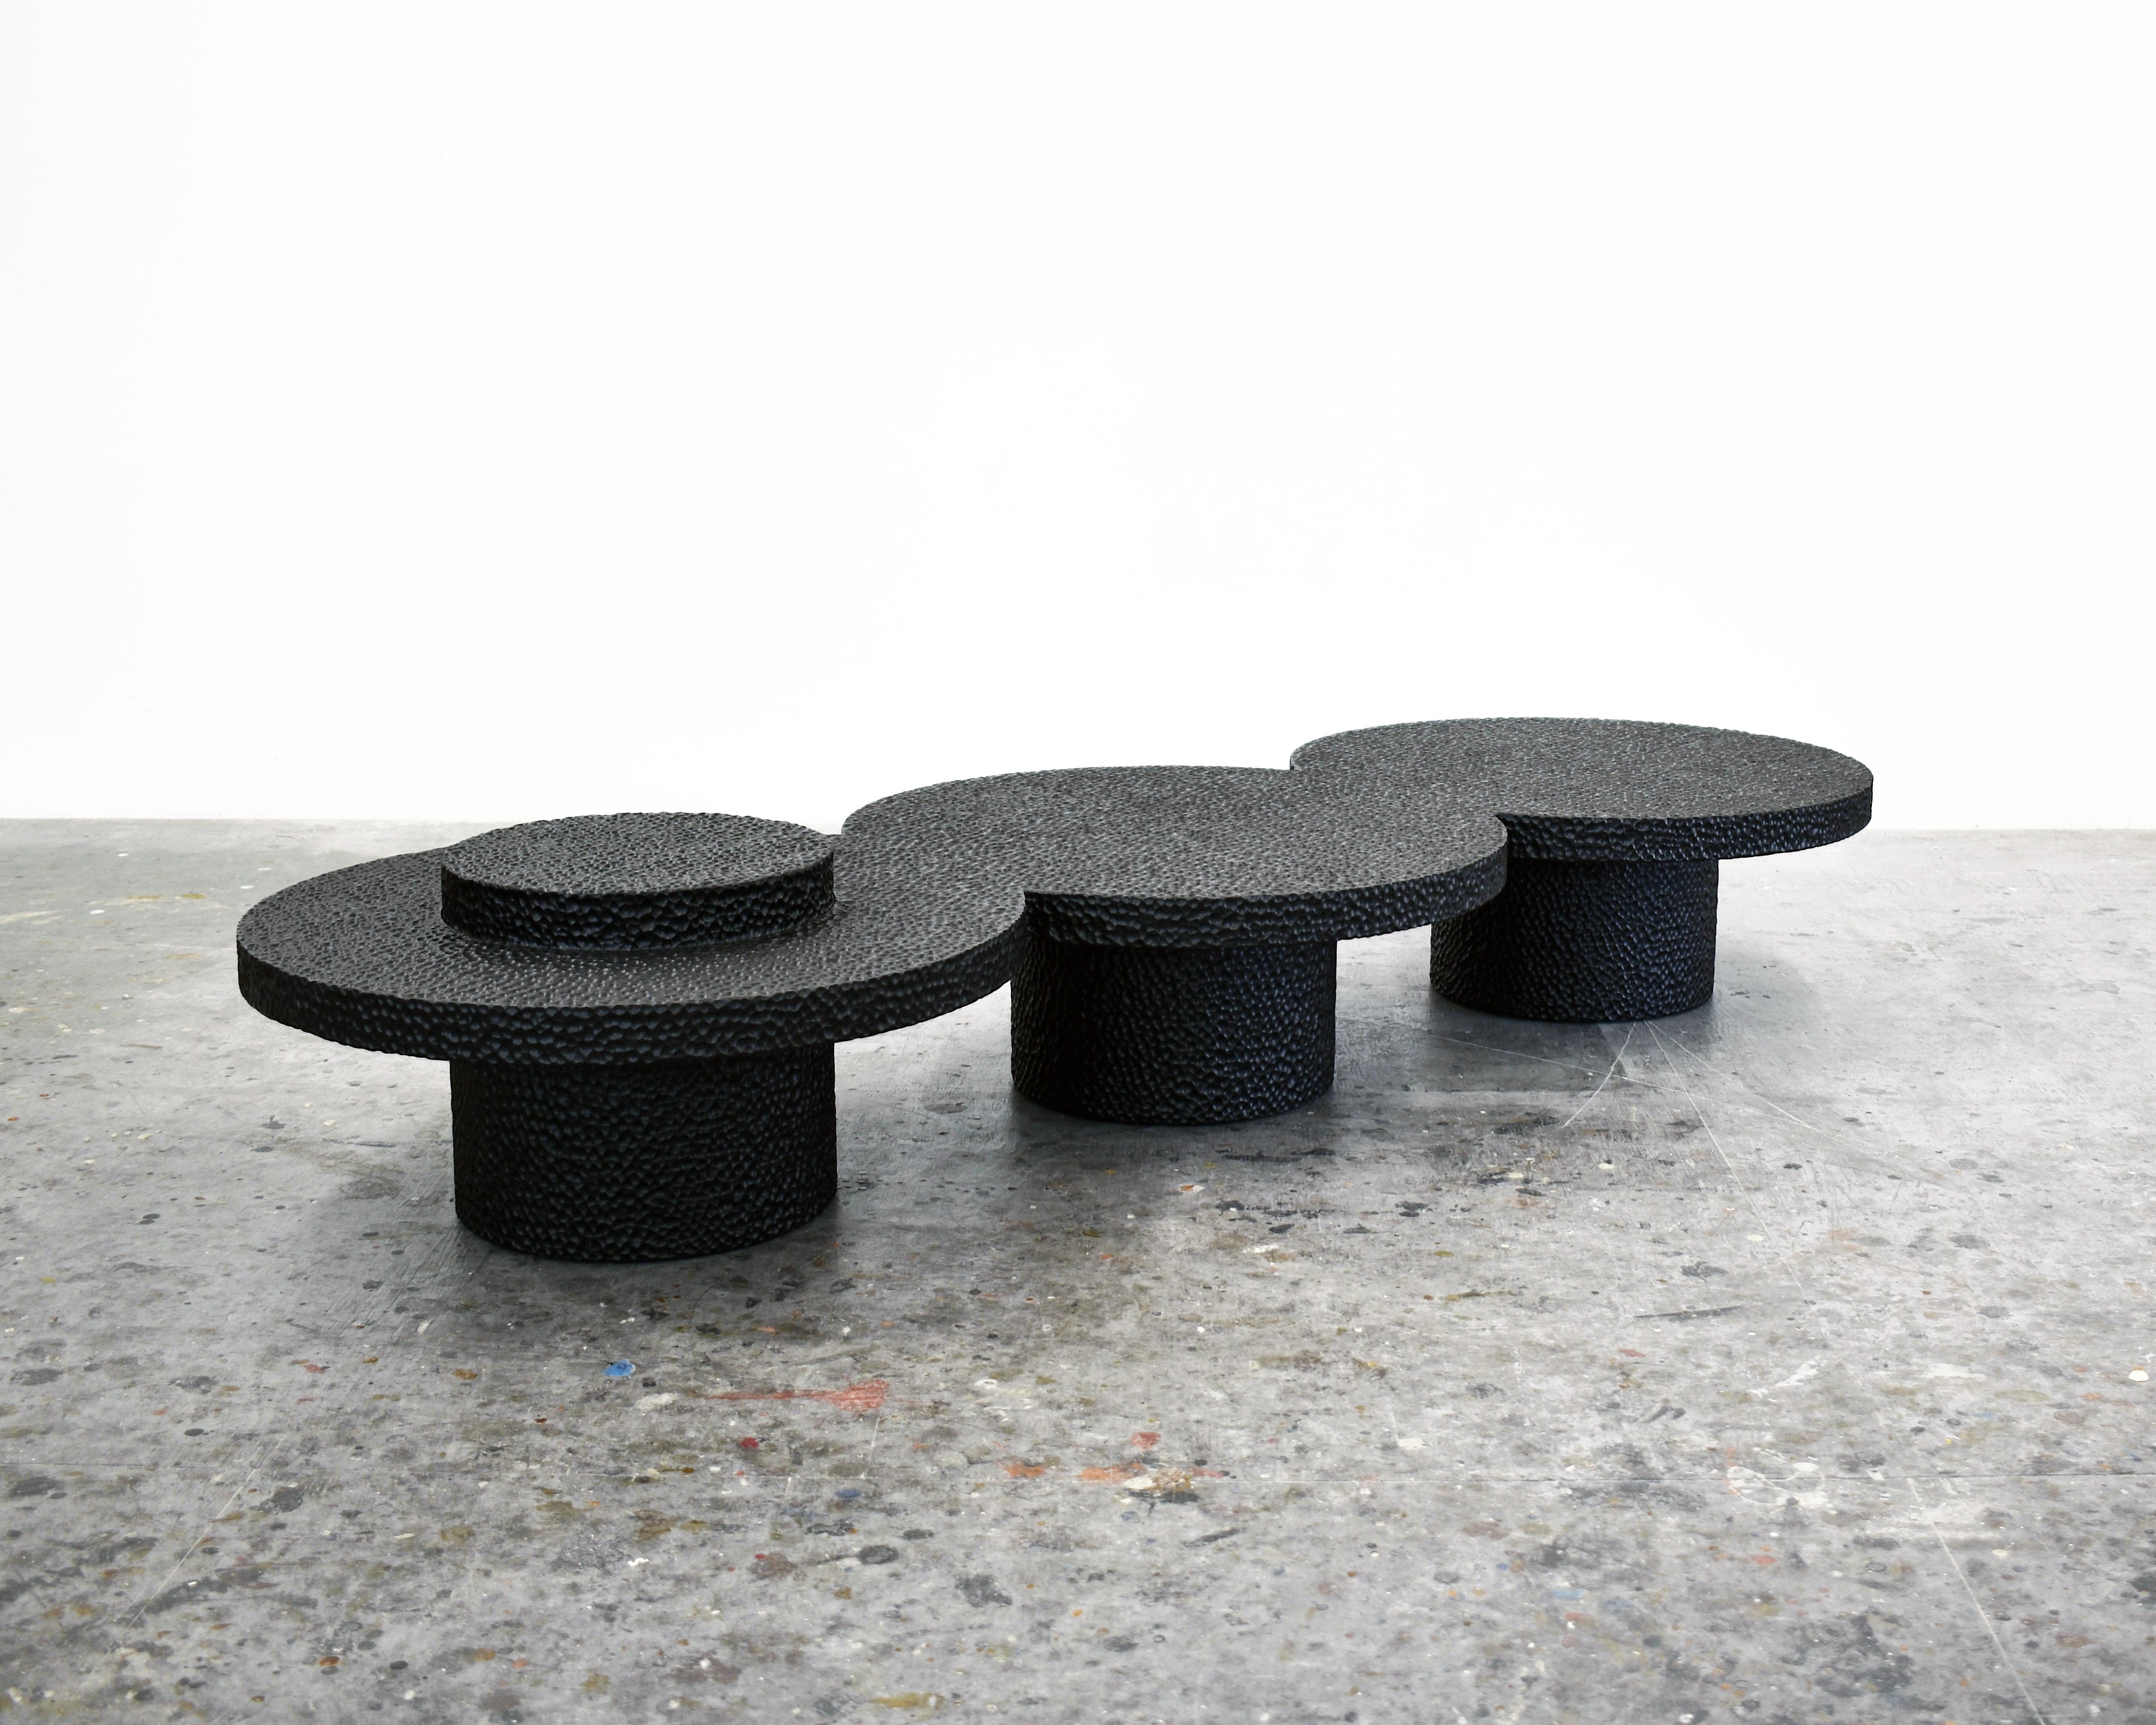 Maple low table sculpted by John Eric Byers
Dimensions: 33 x 71 x 198 cm
Materials: Carved blackened Maple

All works are individually handmade to order.

John Eric Byers creates geometrically inspired pieces that are minimal, emotional, and